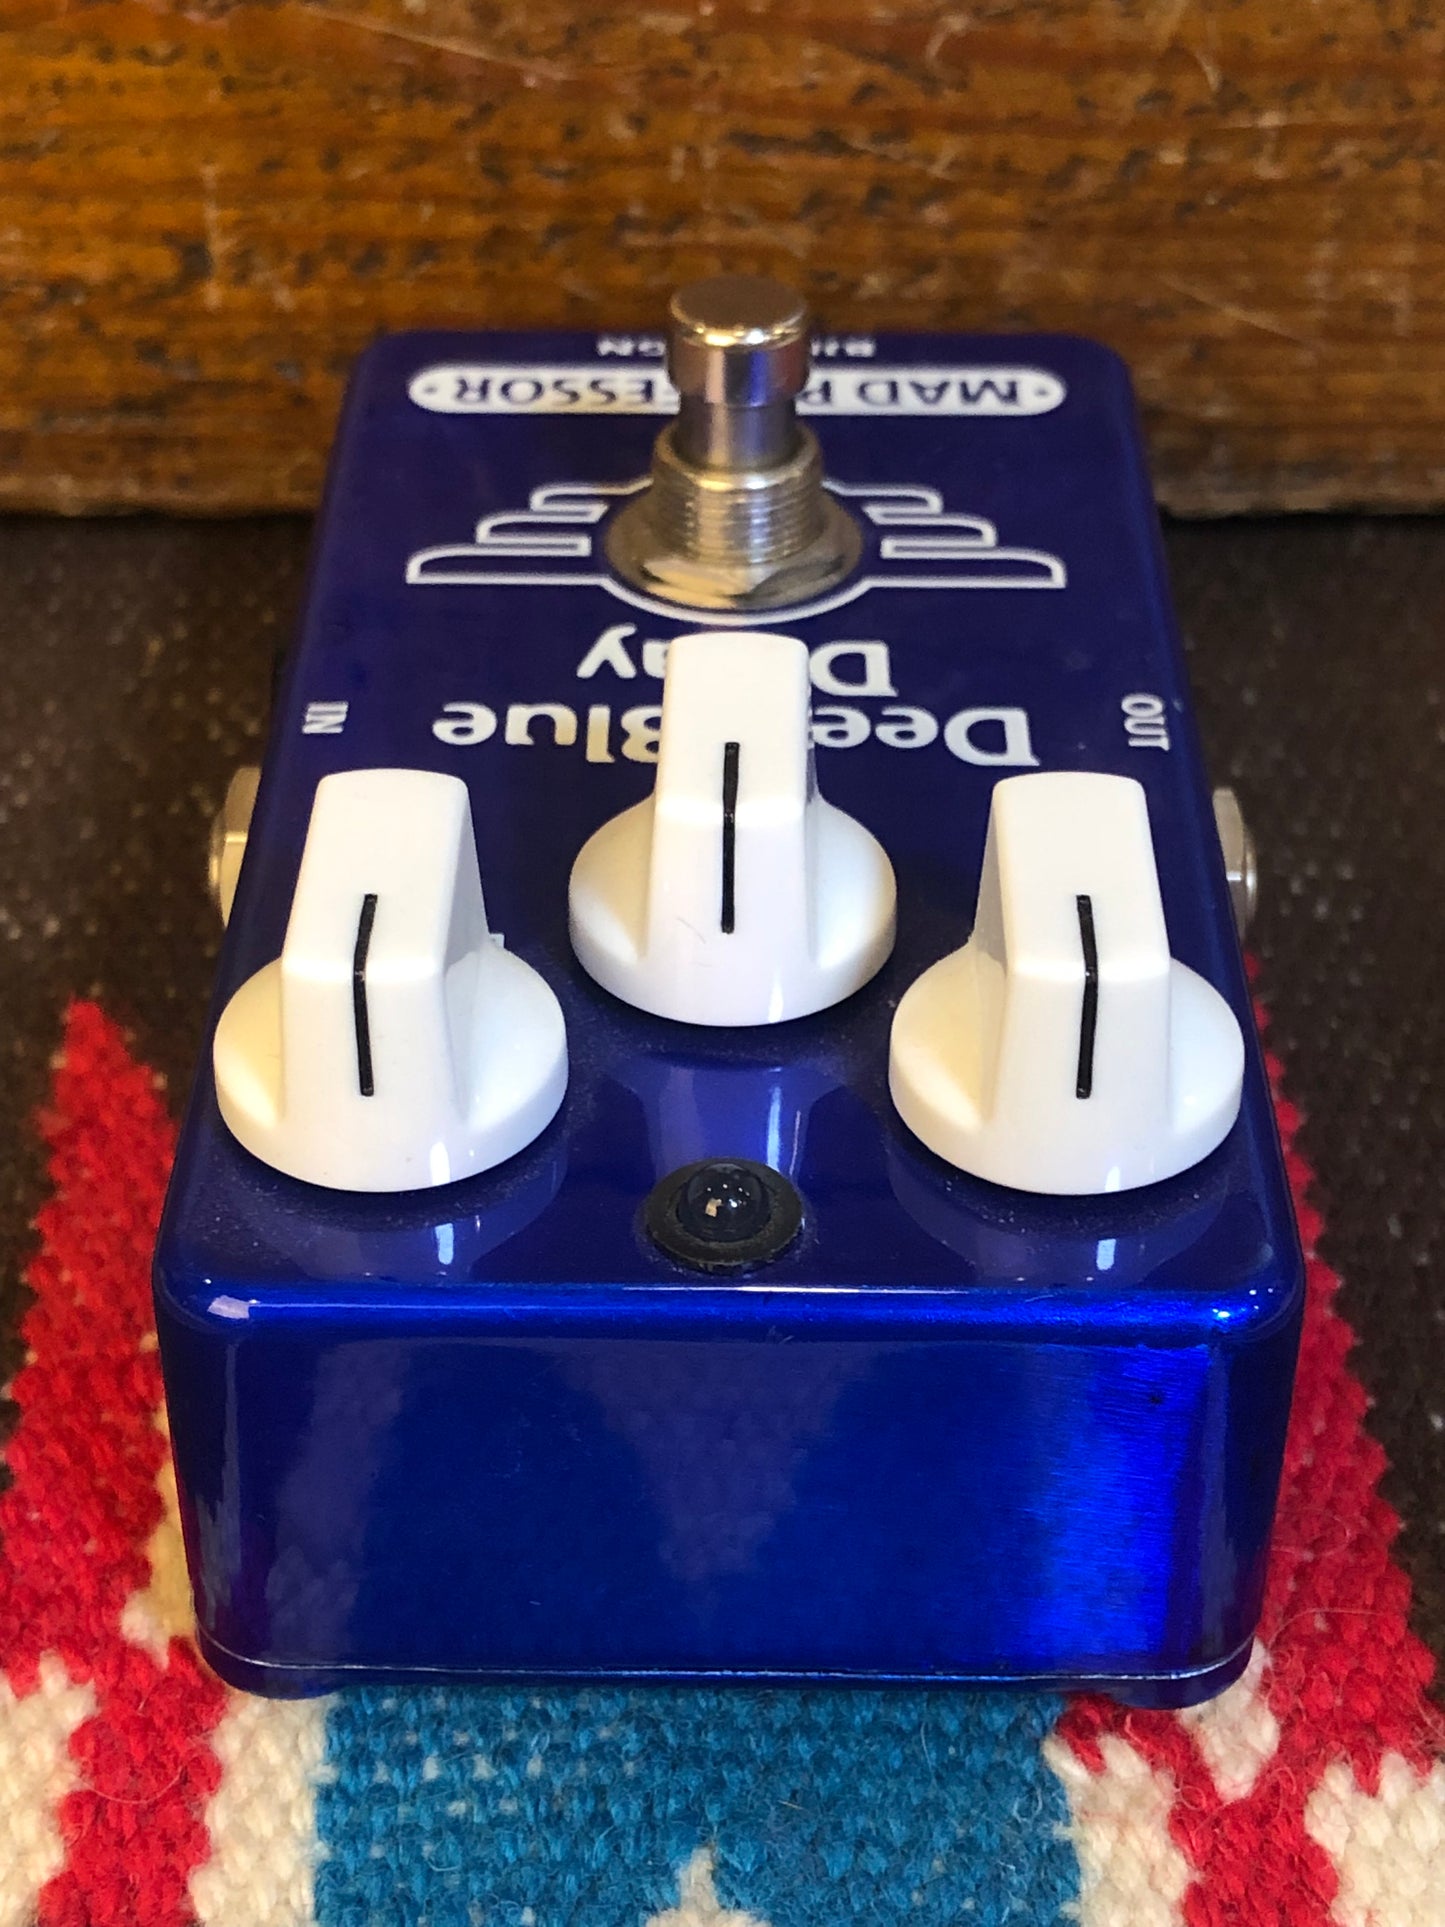 Mad Professor Hand Wired Deep Blue Delay Pedal w/ Box